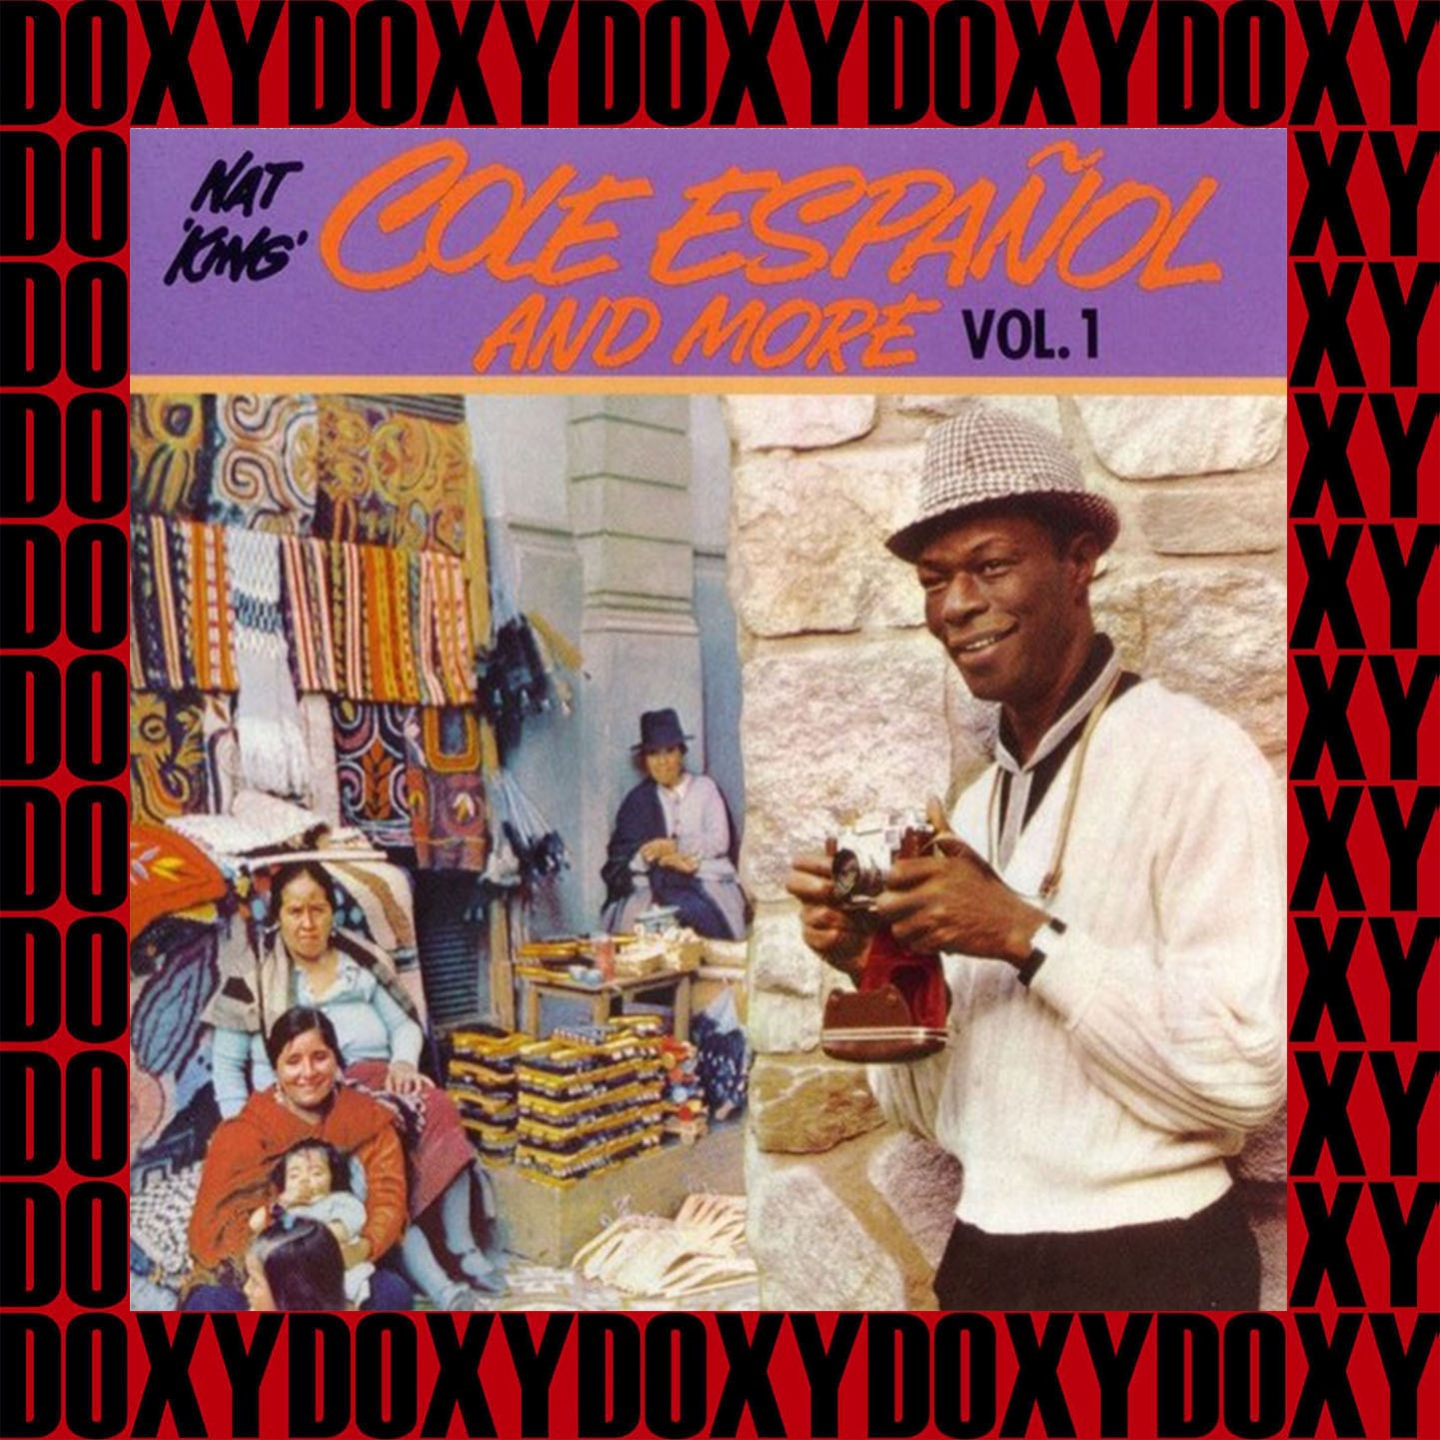 Espa ol And More Vol. 1 Remastered Version Doxy Collection